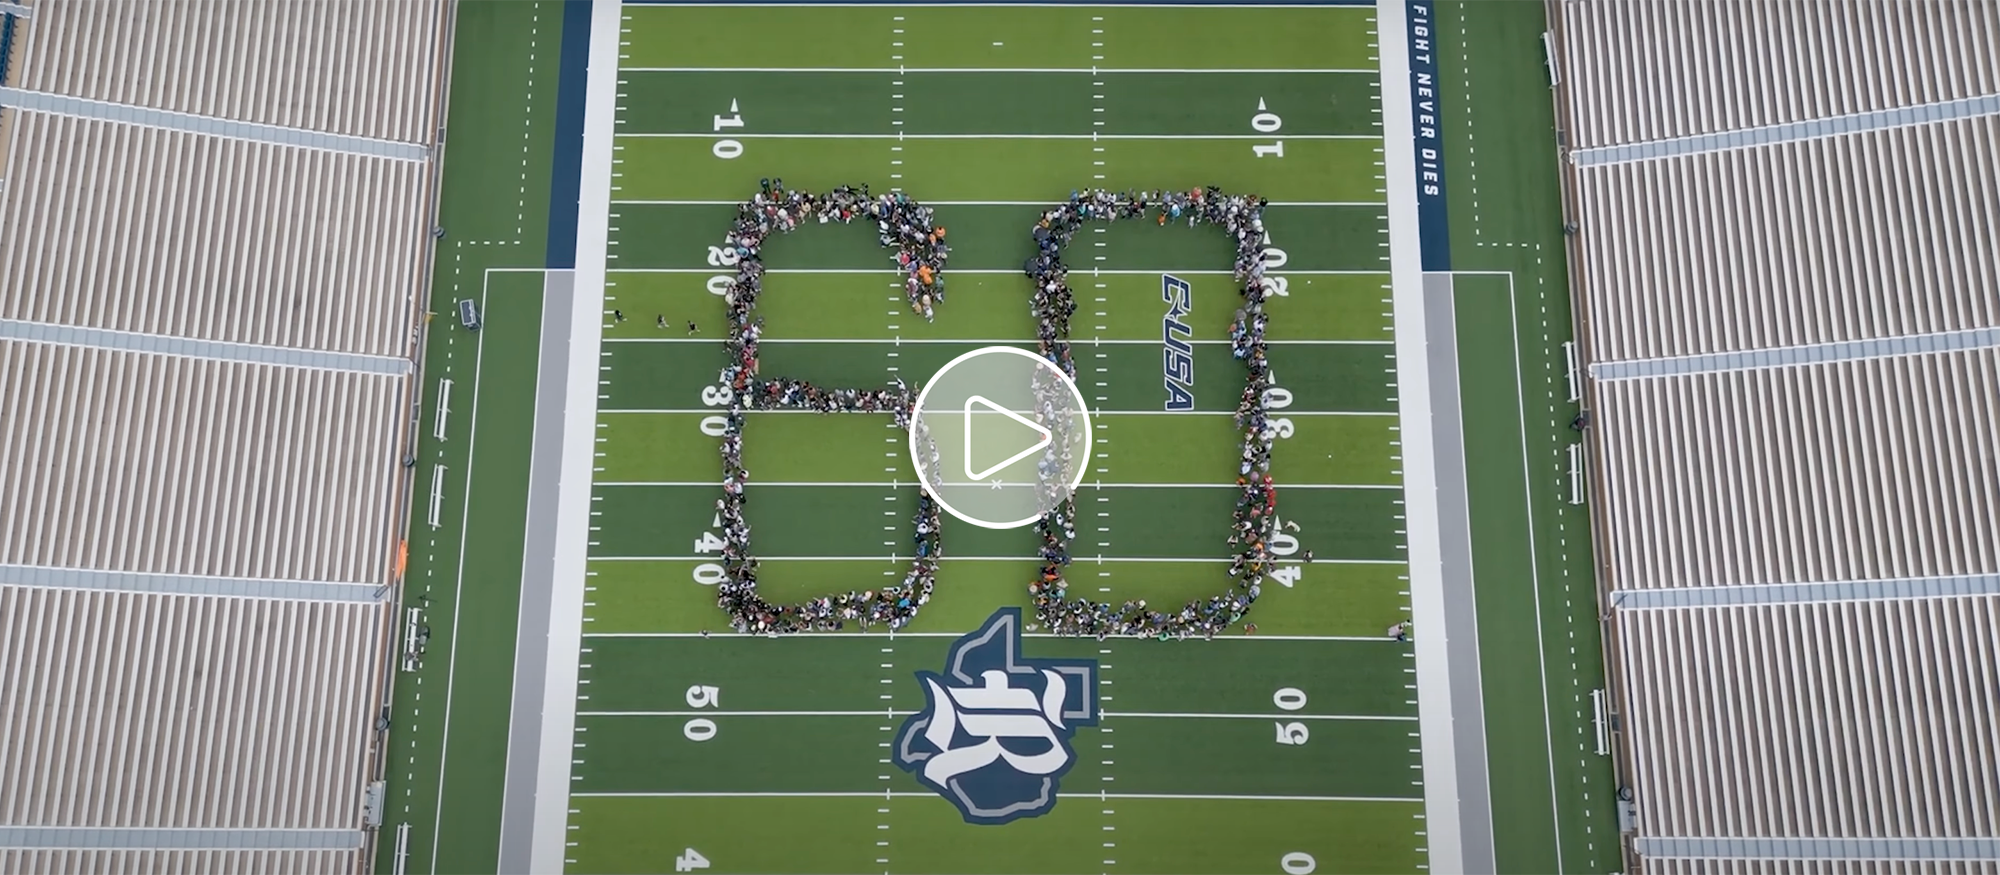 Aerial view of Rice University football field with people standing on the field to form the number 60.